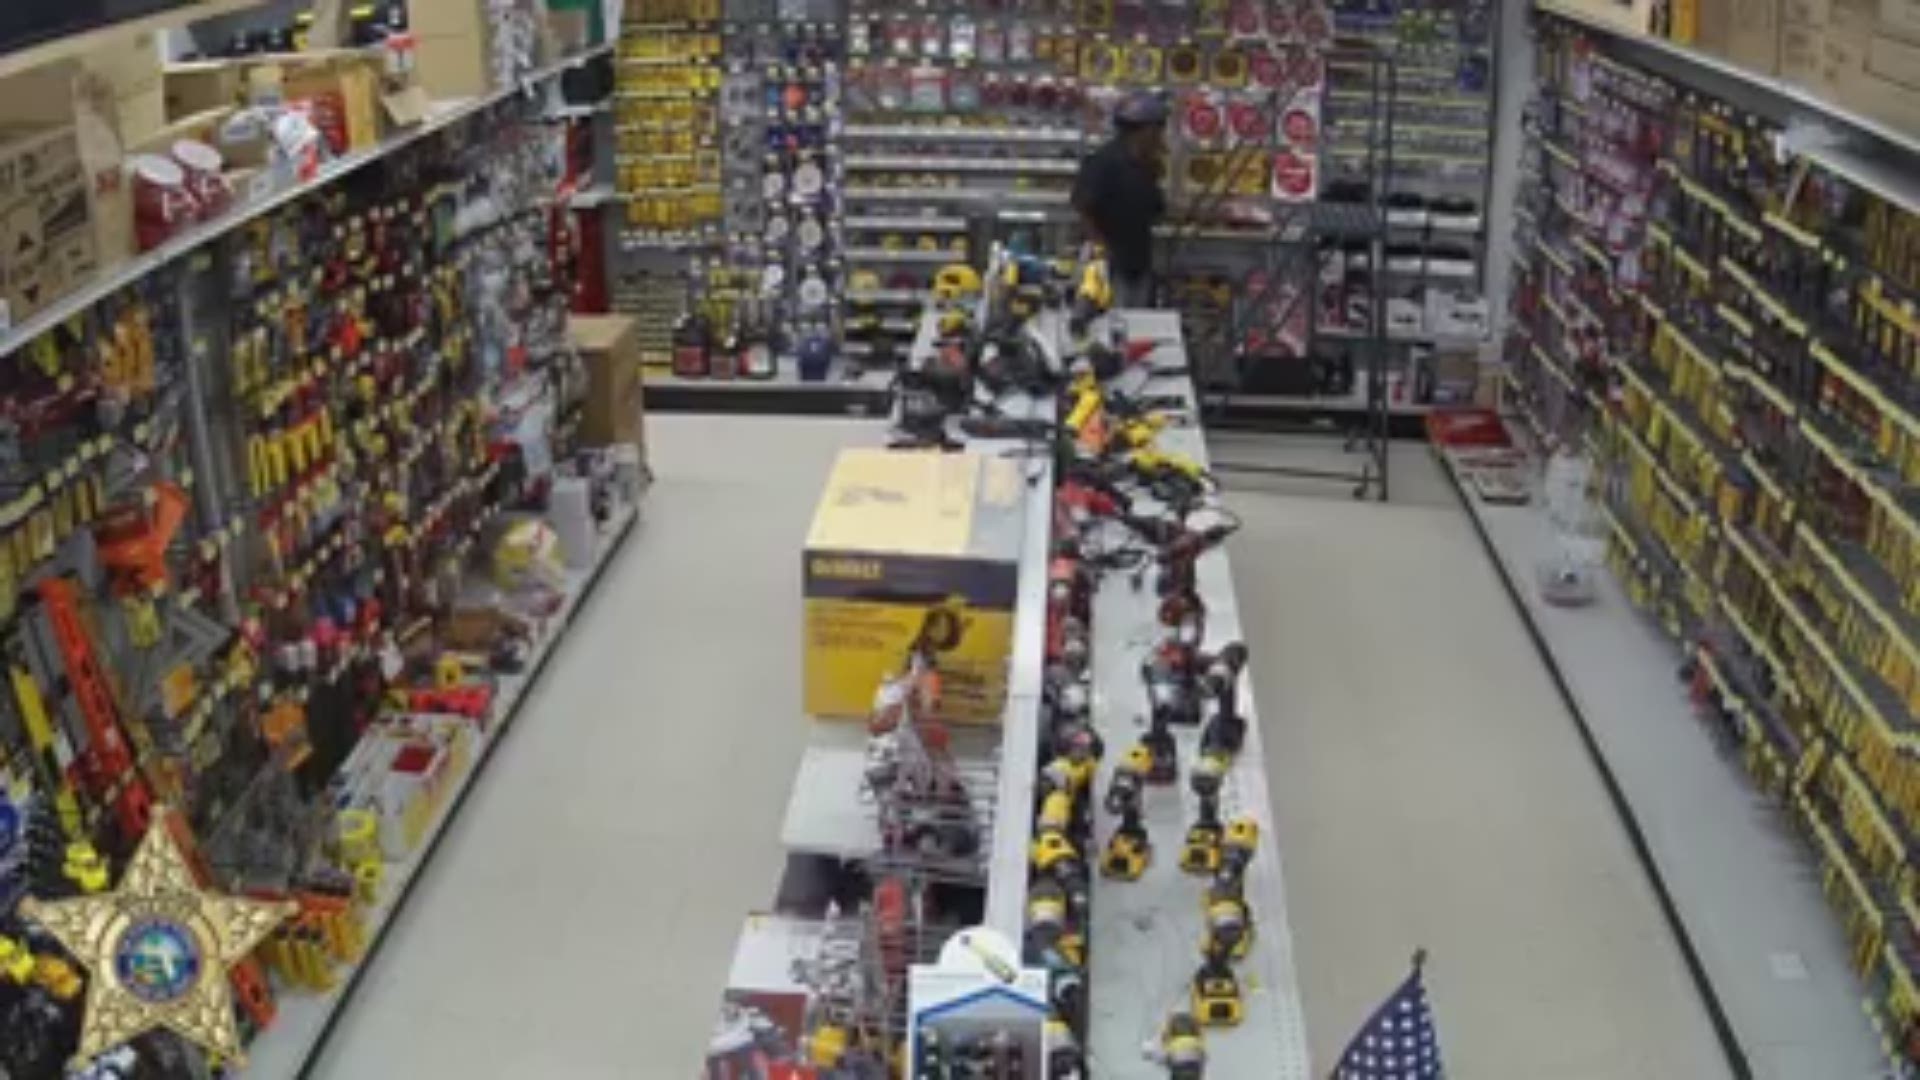 This video from the Leon County Sheriff's Office shows a man shoplifting at an Ace Hardware in Wooville putting circular saw and Sawzall blades in his pants.